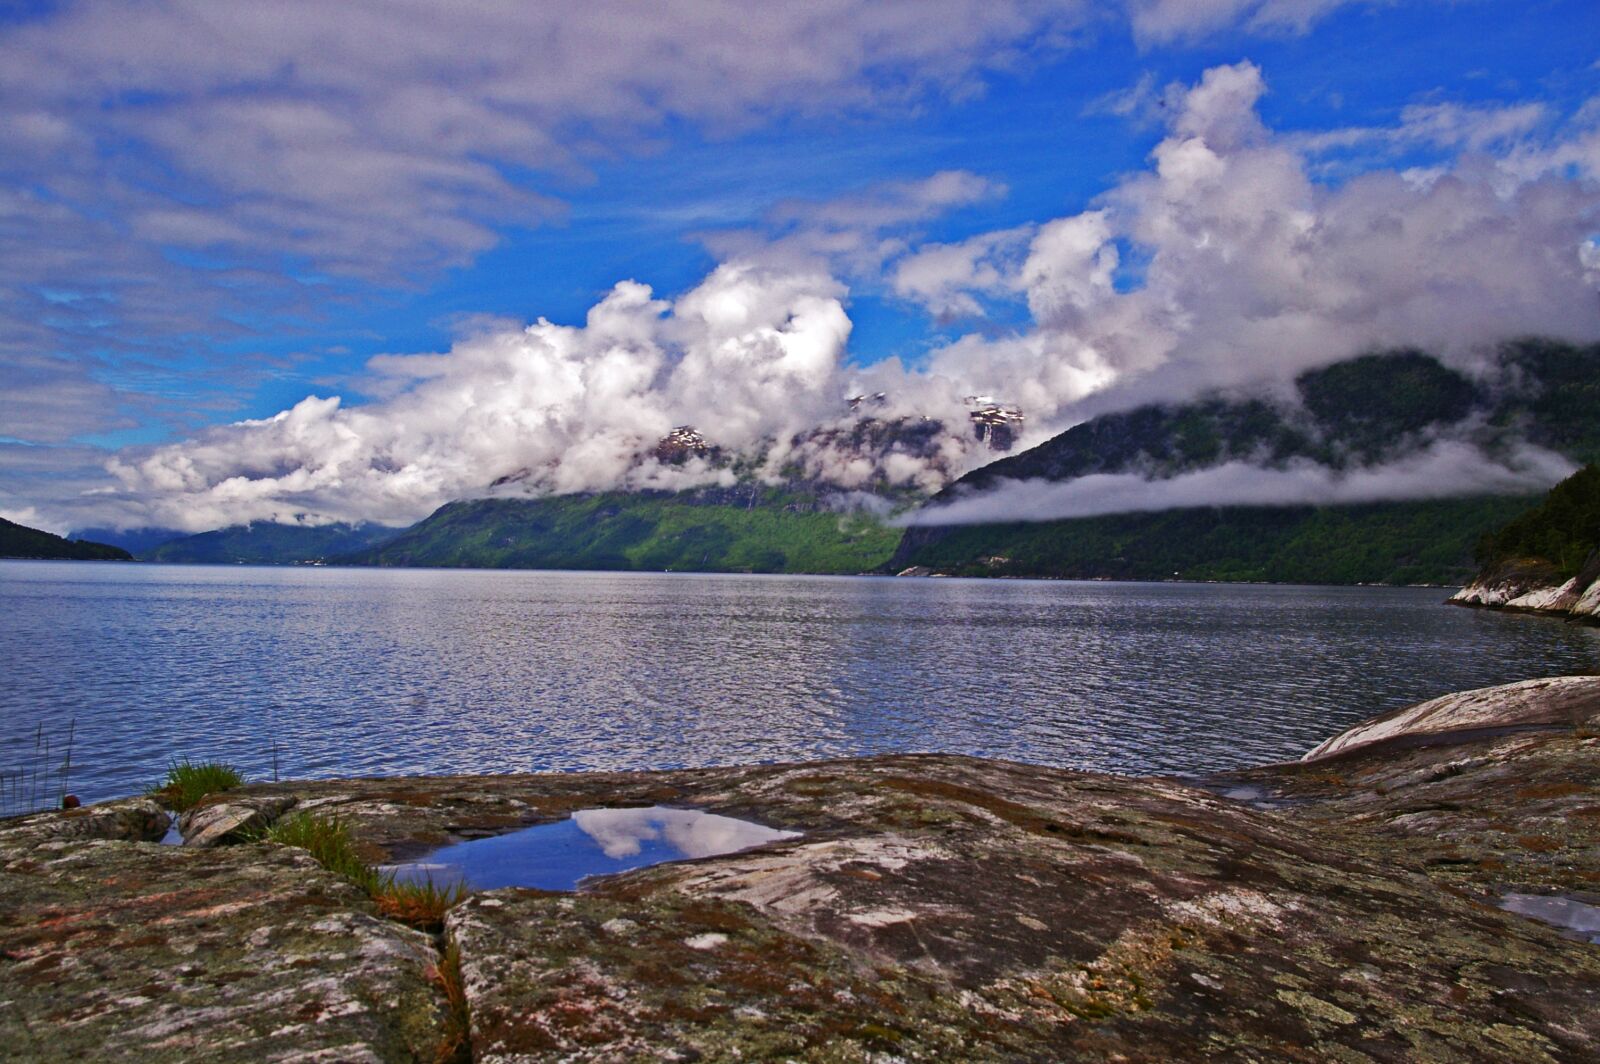 Pentax *ist DL2 sample photo. Norway, fjord, landscape photography